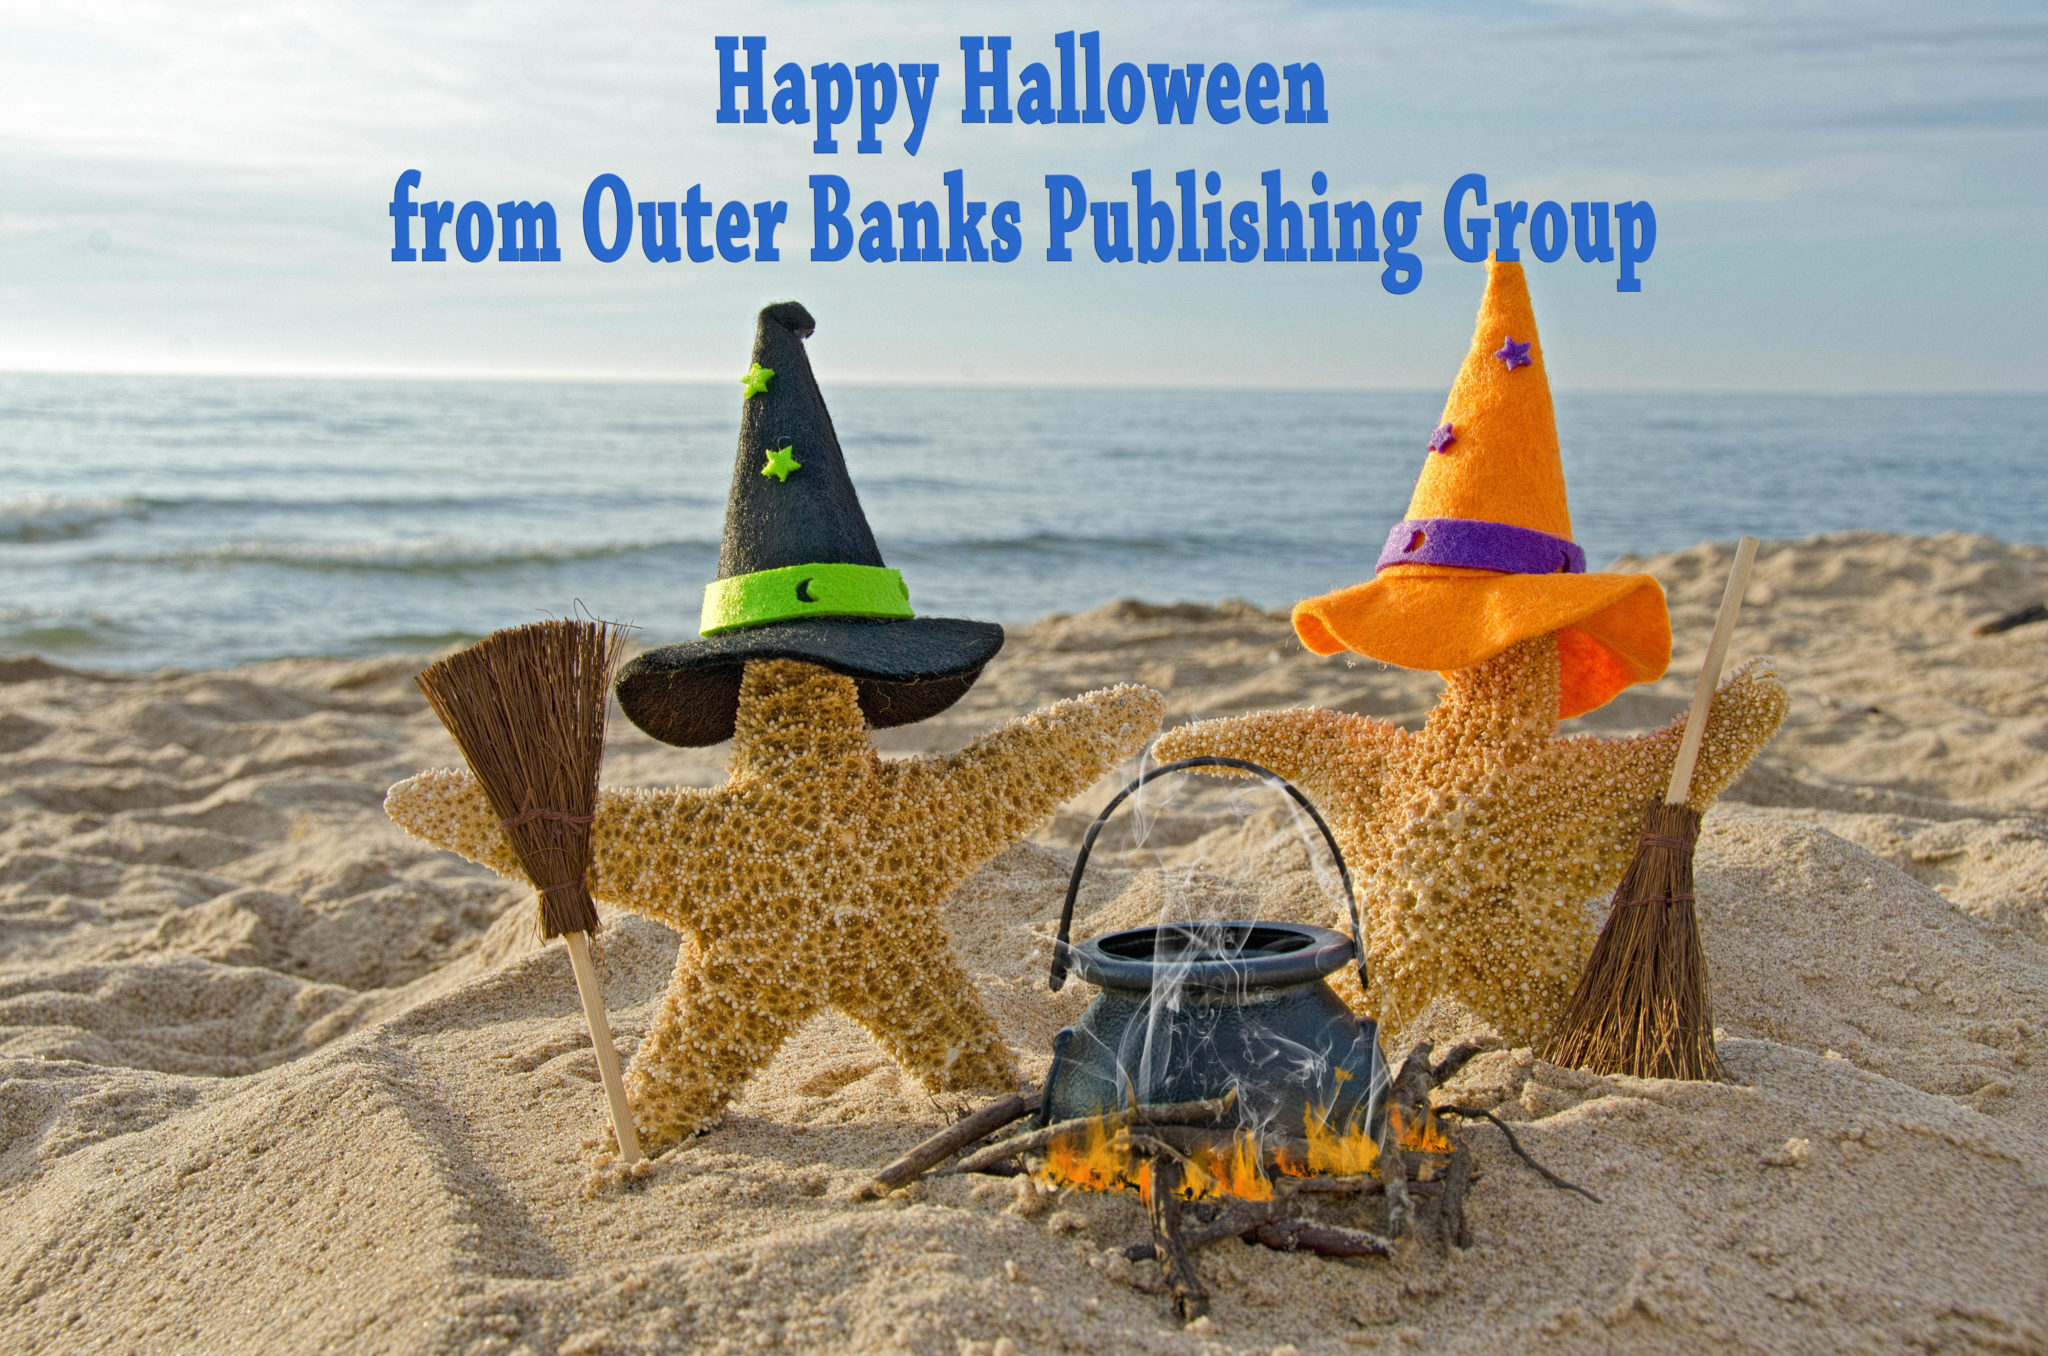 Halloween at the Outer Banks